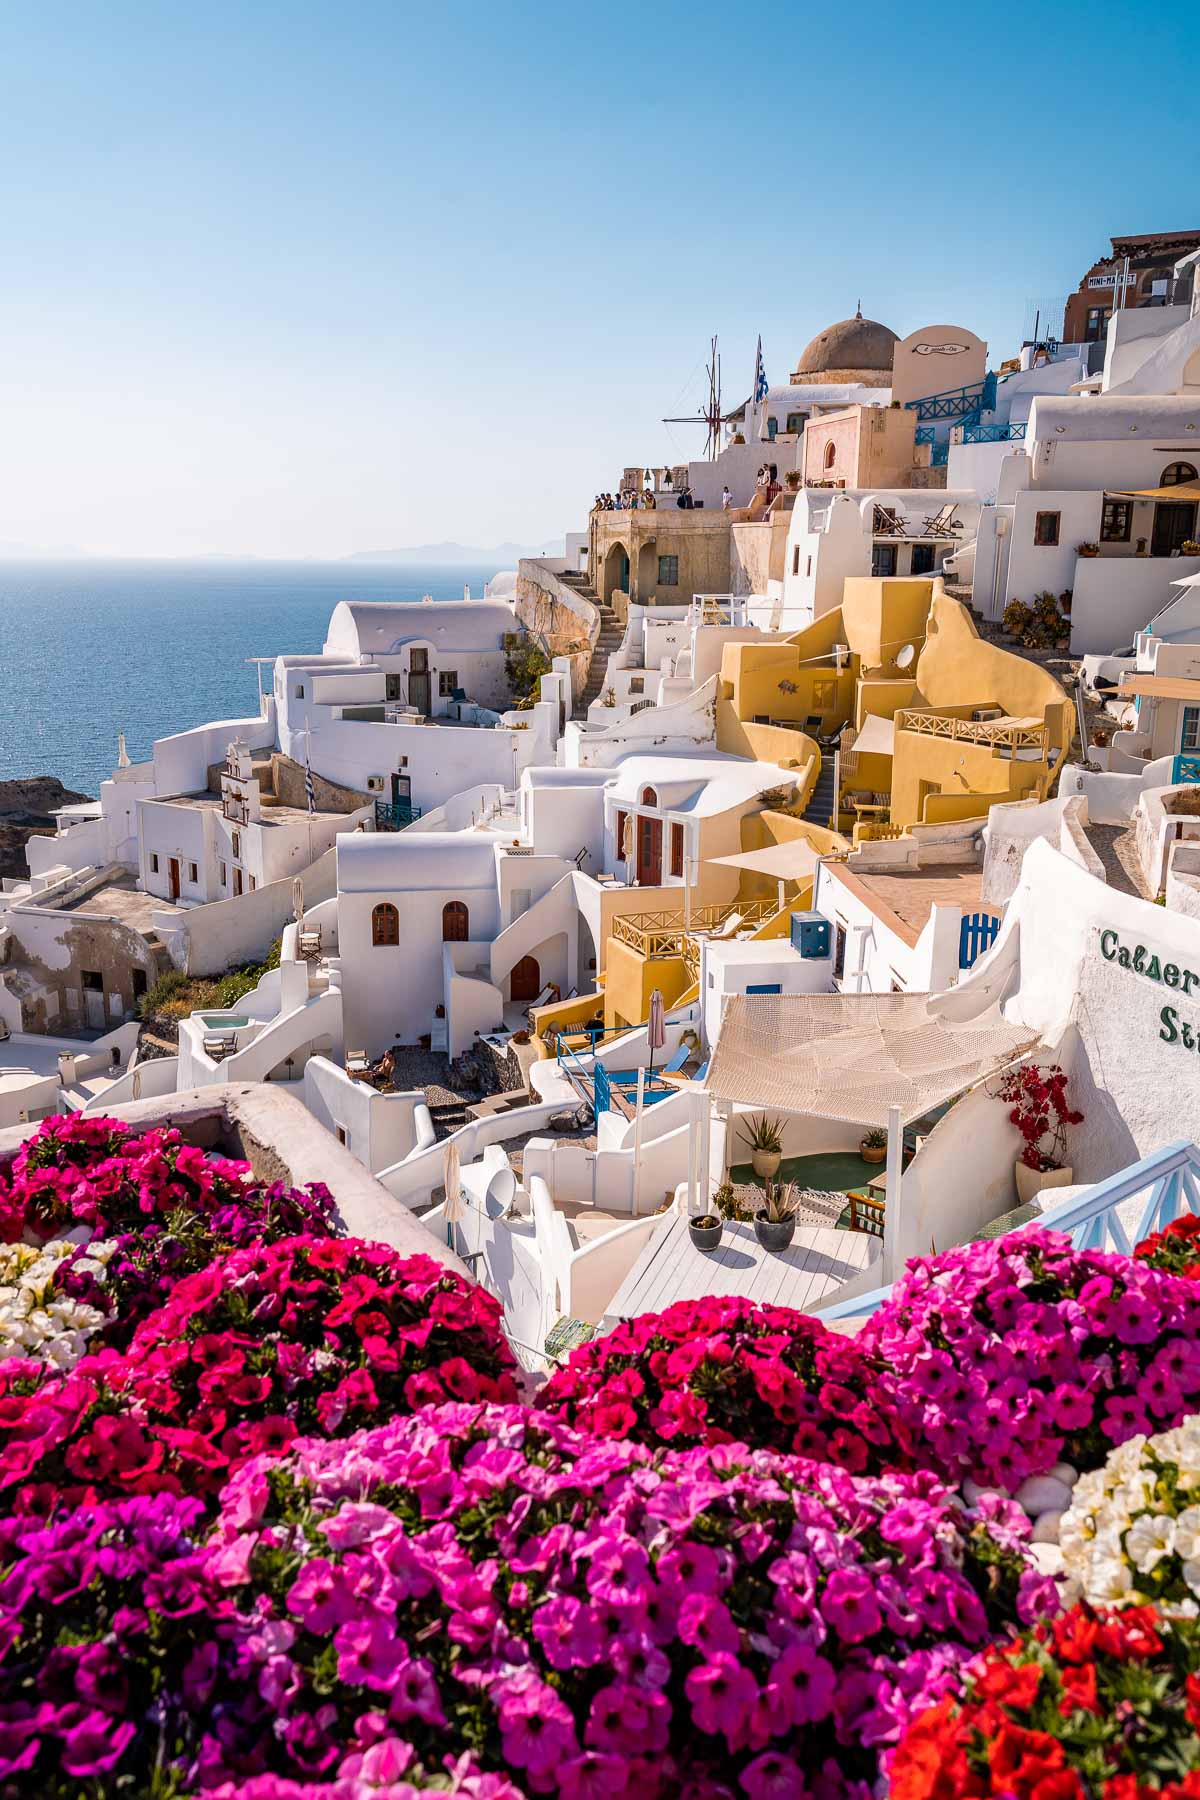 Oia, Santorini with pink flowers in the foreground